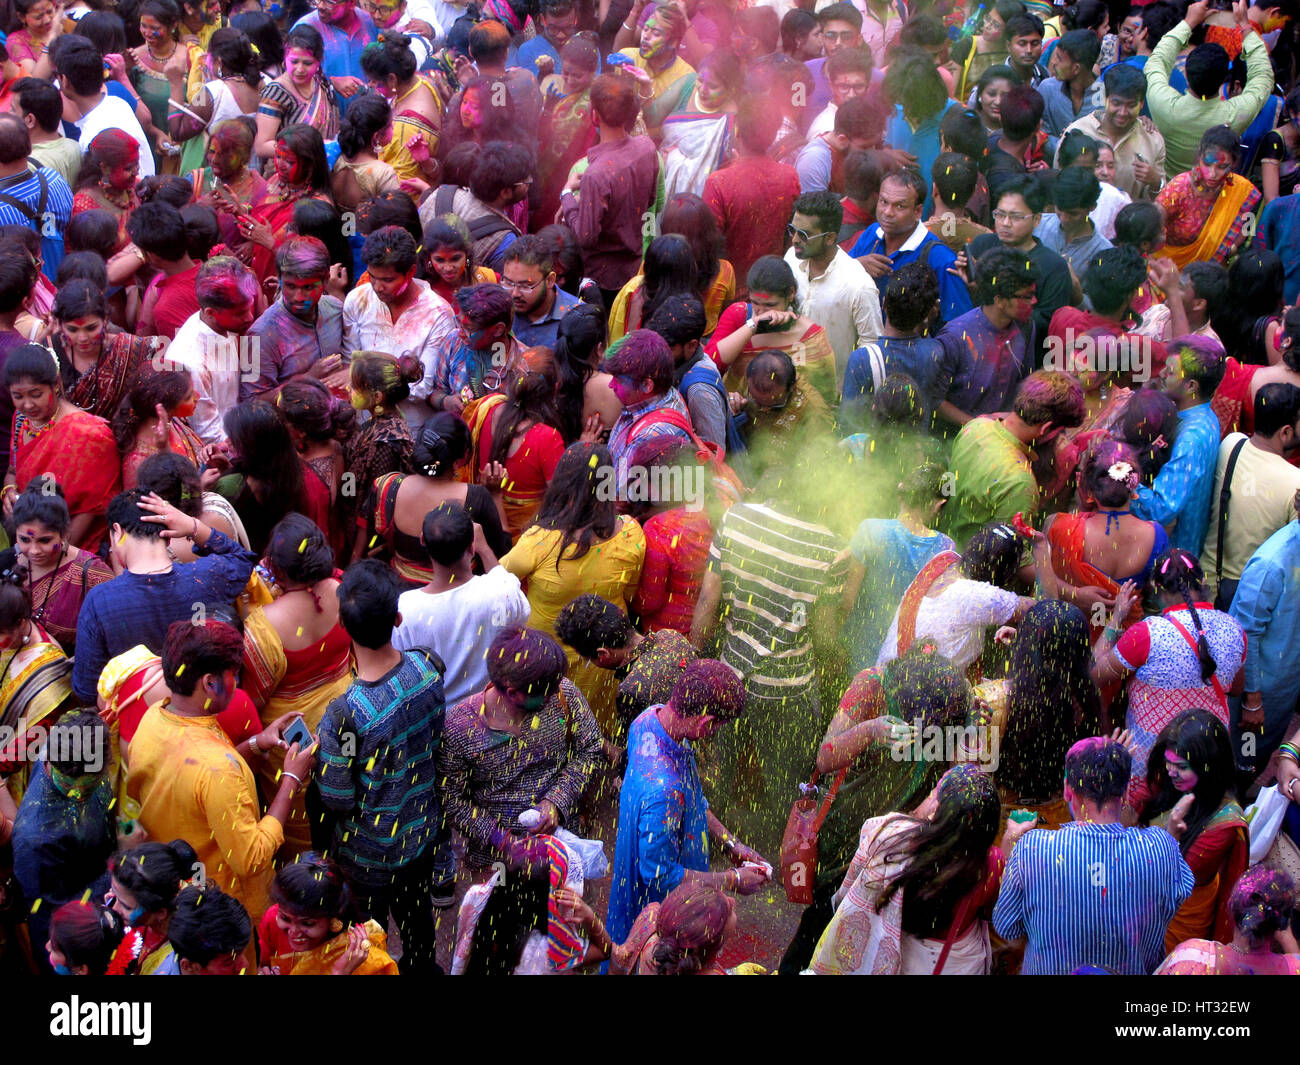 Students of Rabindrabharati University celebrating a mass holi festival in Jorashakho Tagore House on Tuesday before the Holi Festival, in Calcutta, West Bengal, India. Picture by Amit Datta (07.03.2017) Credit: Amit Datta/Alamy Live News Stock Photo